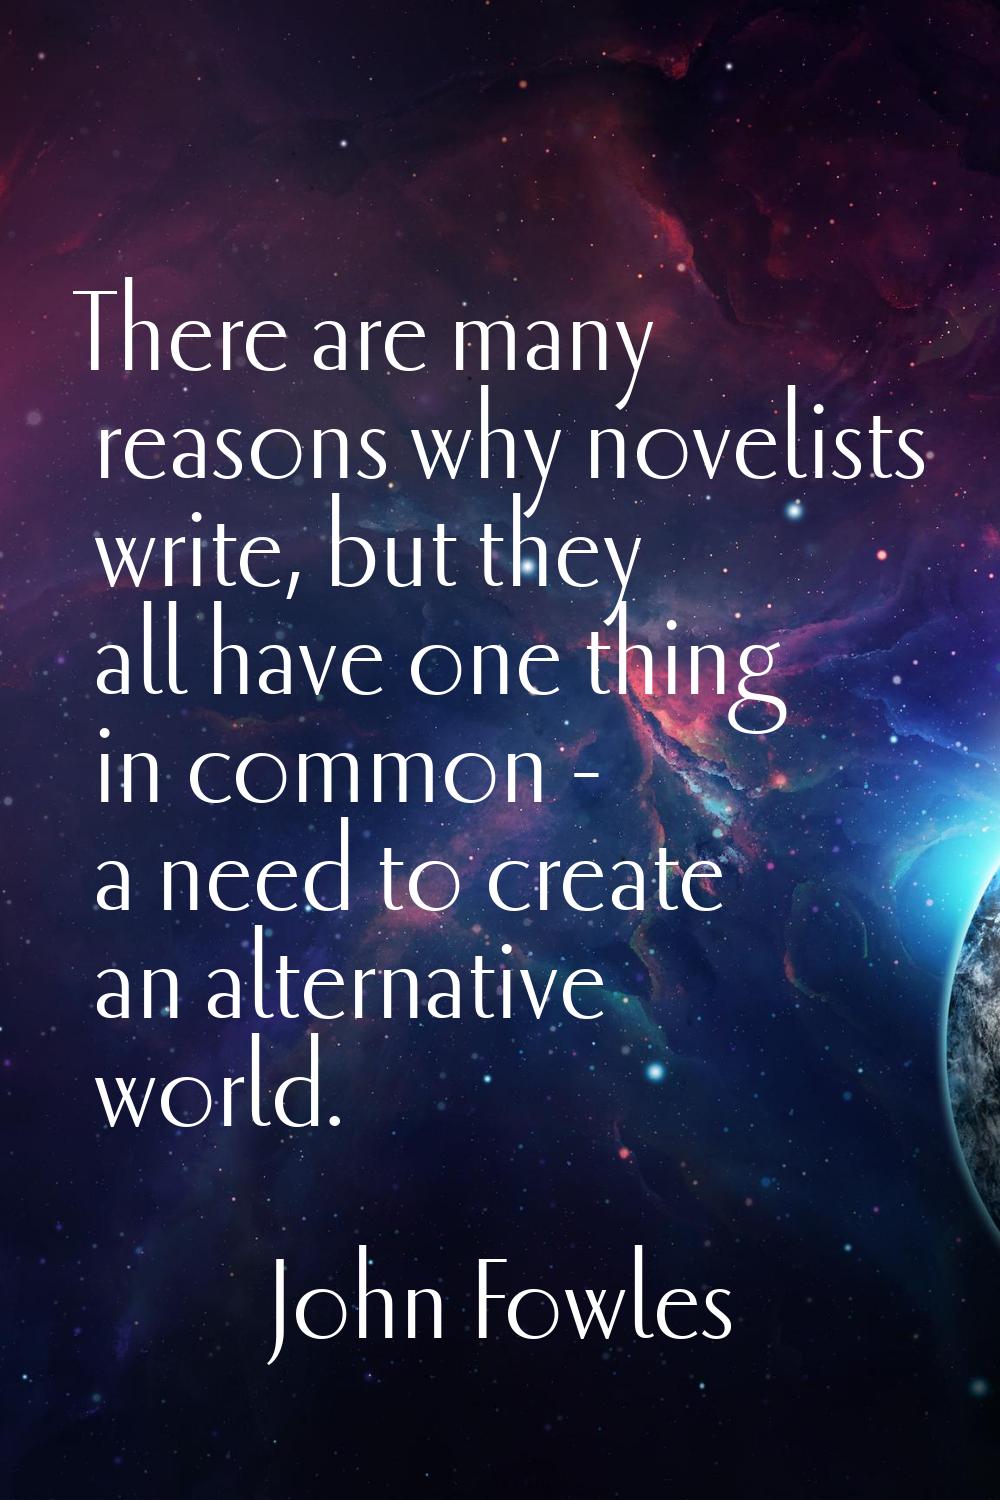 There are many reasons why novelists write, but they all have one thing in common - a need to creat